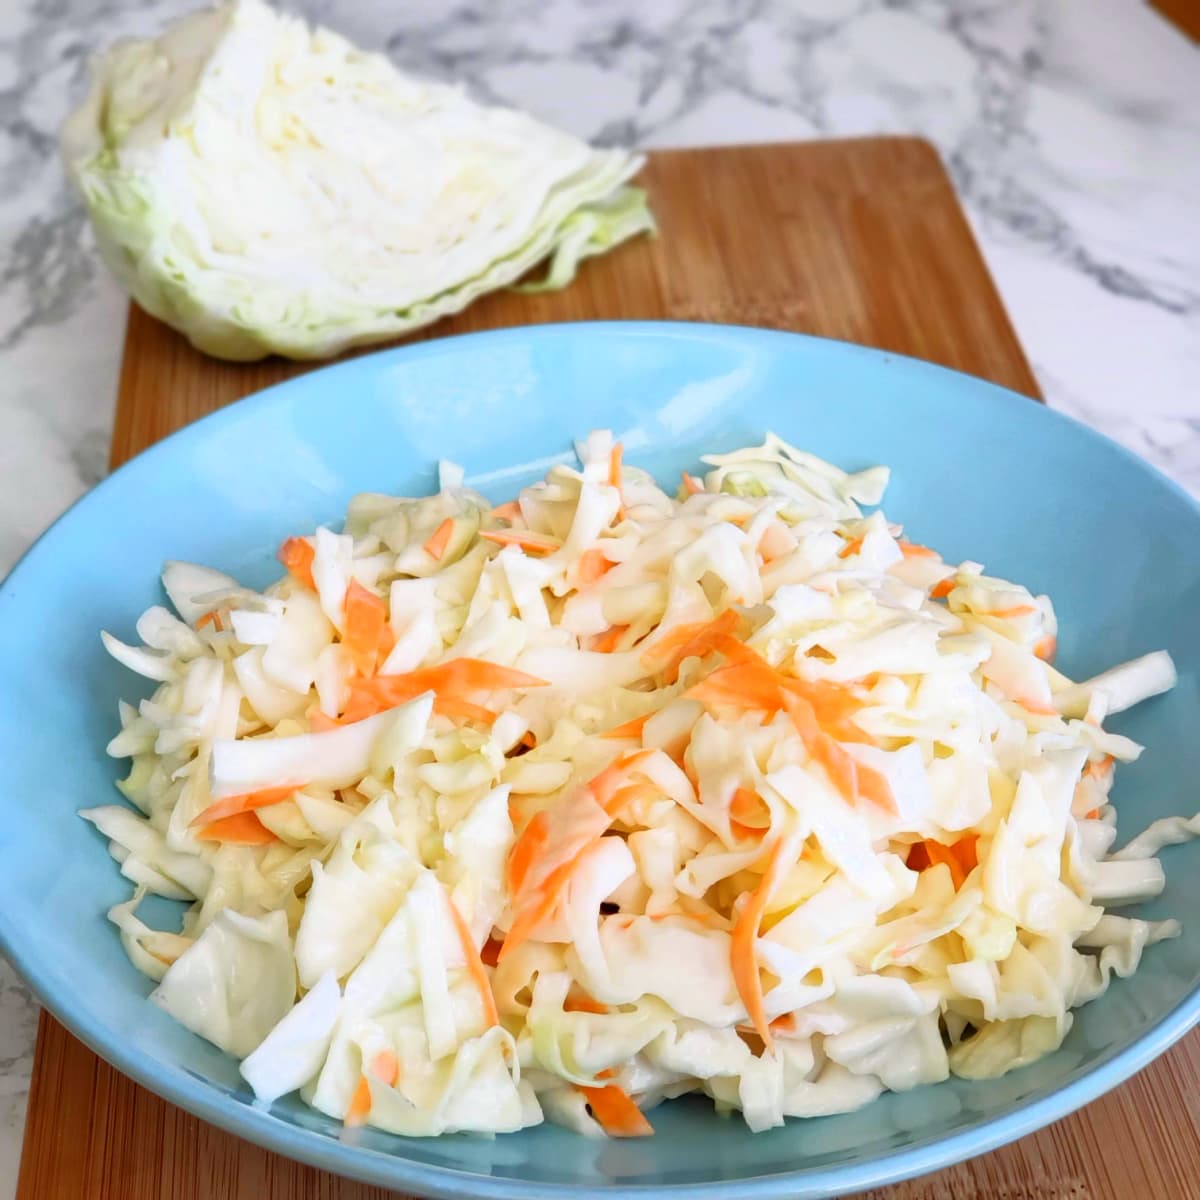 Easy Chick-fil-A Cole Slaw in a light blue bowl on a wooden cutting board